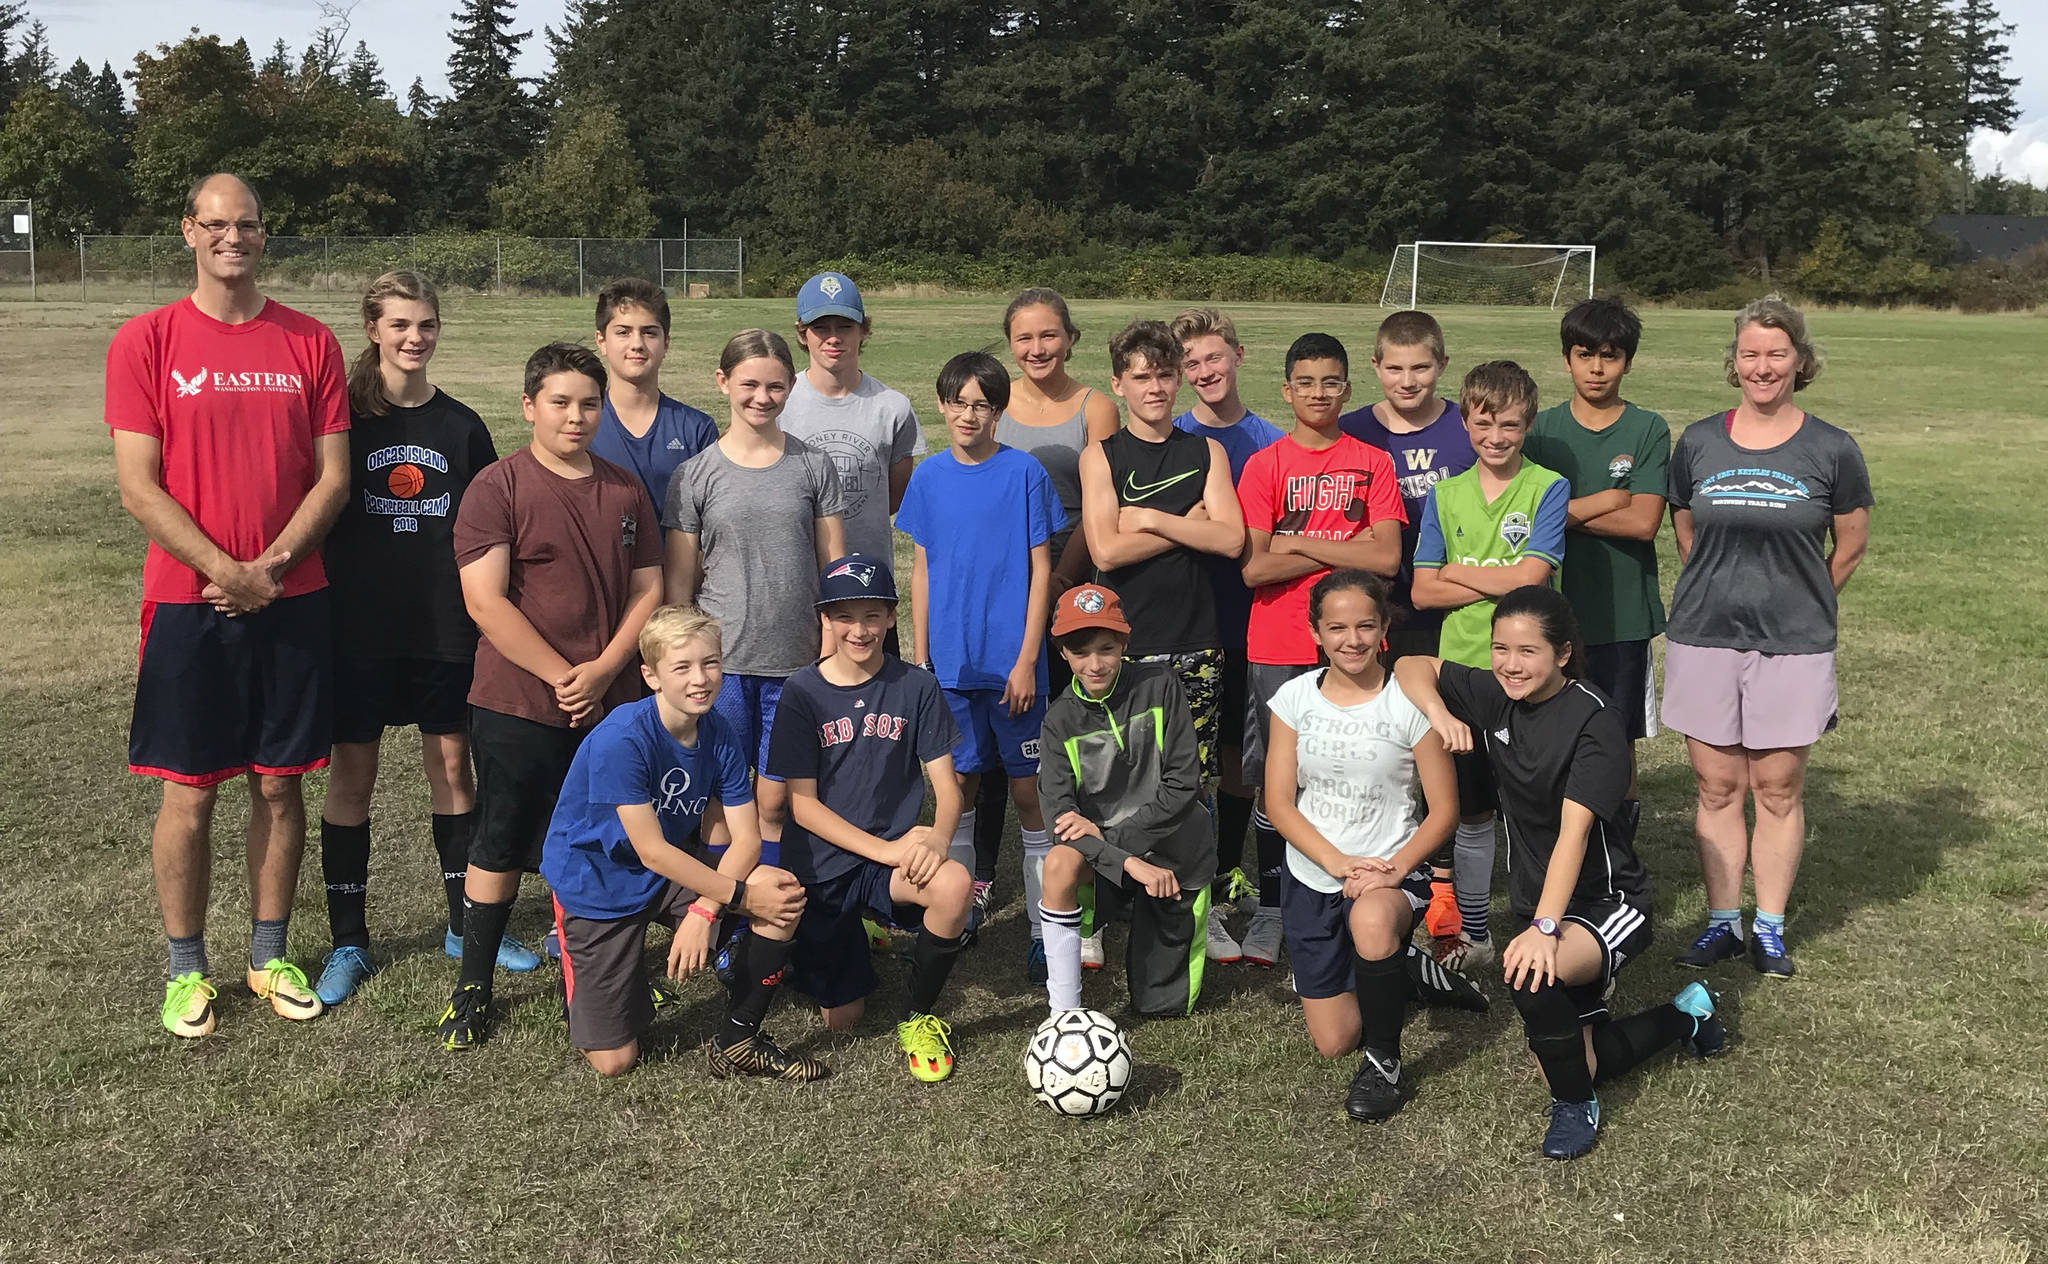 Back row, left to right: Coach Phil Carter, Bethany Carter, Diego Lago, Lael Watson, Celia Groeninger, Elijah Giampietro, Paxton White, Kashi Campbell and coach Kate Long. Middle row: Orion Meskew, Meriel Griffith, Theo Vaccarella, Tommy Anderson-Cleveland, Pedro Guerra and Ethan Moss. Front row: Sam Sutton, Jefferson Freeman, Isaac Moss, Milana Schneider and Meg Waldron.